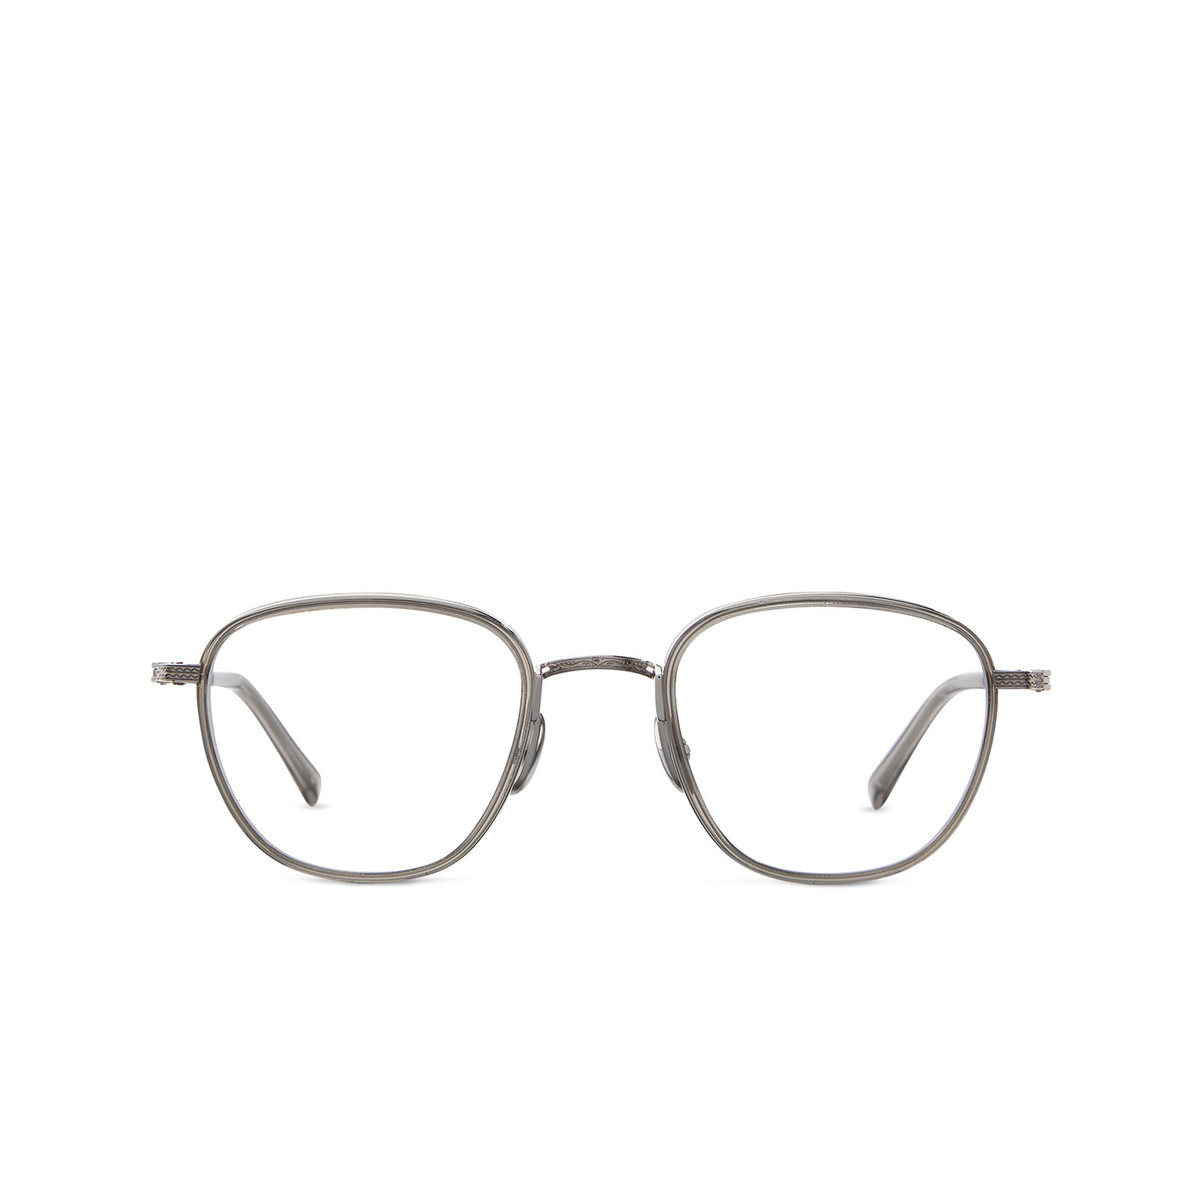 Mr. Leight GRIFFITH II C Eyeglasses GRYCRY-PLT Grey Crystal-Platinum - front view